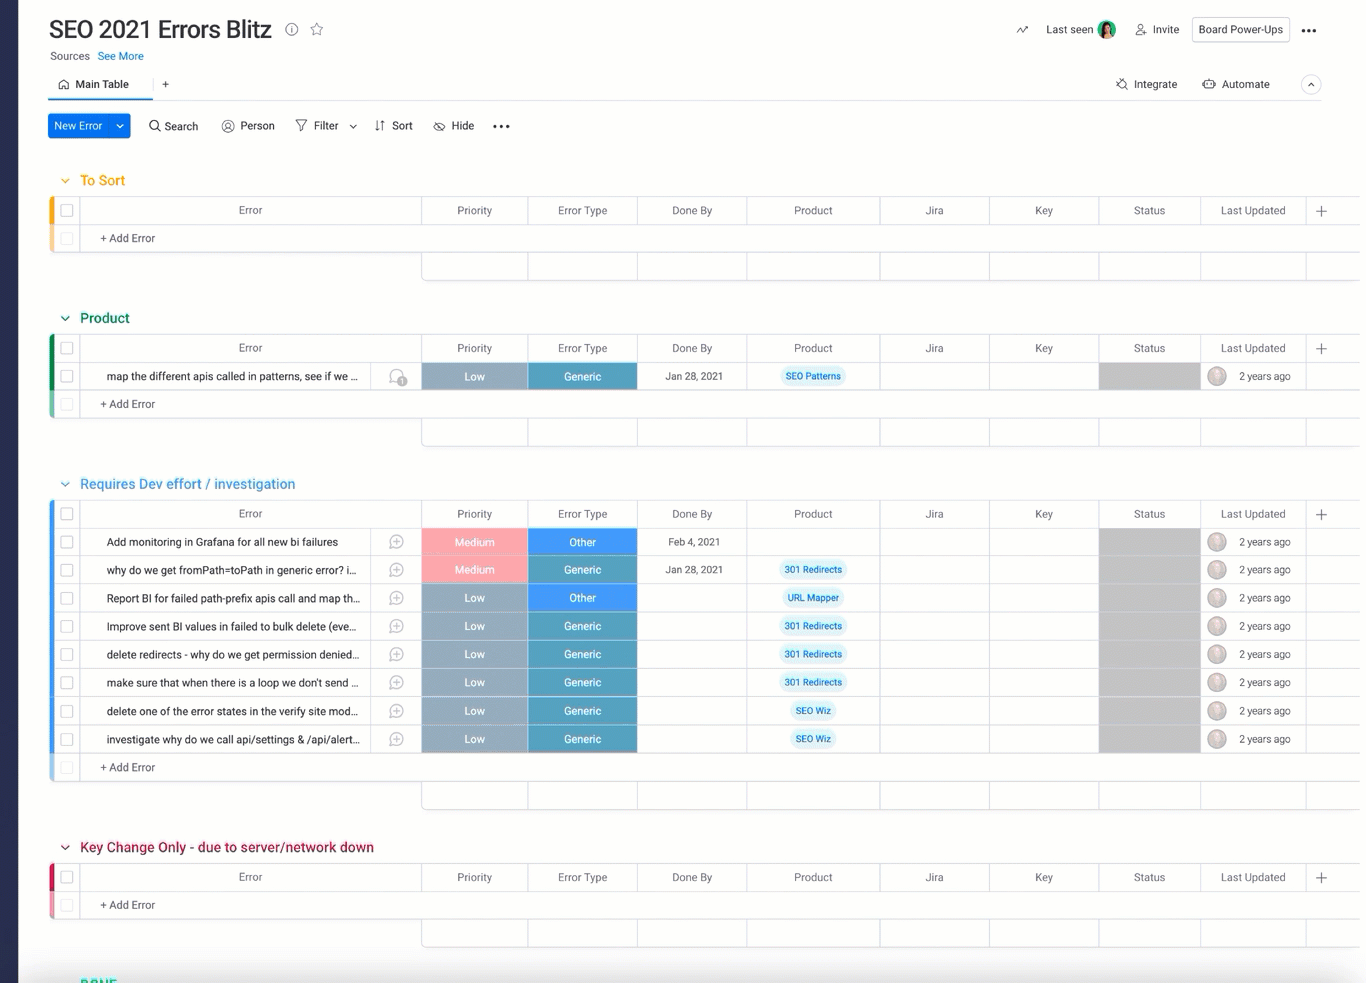 A scrolling GIF of a Monday.com board (task management system) that shows different kinds of errors, their priorities, what type of error, and a due date.